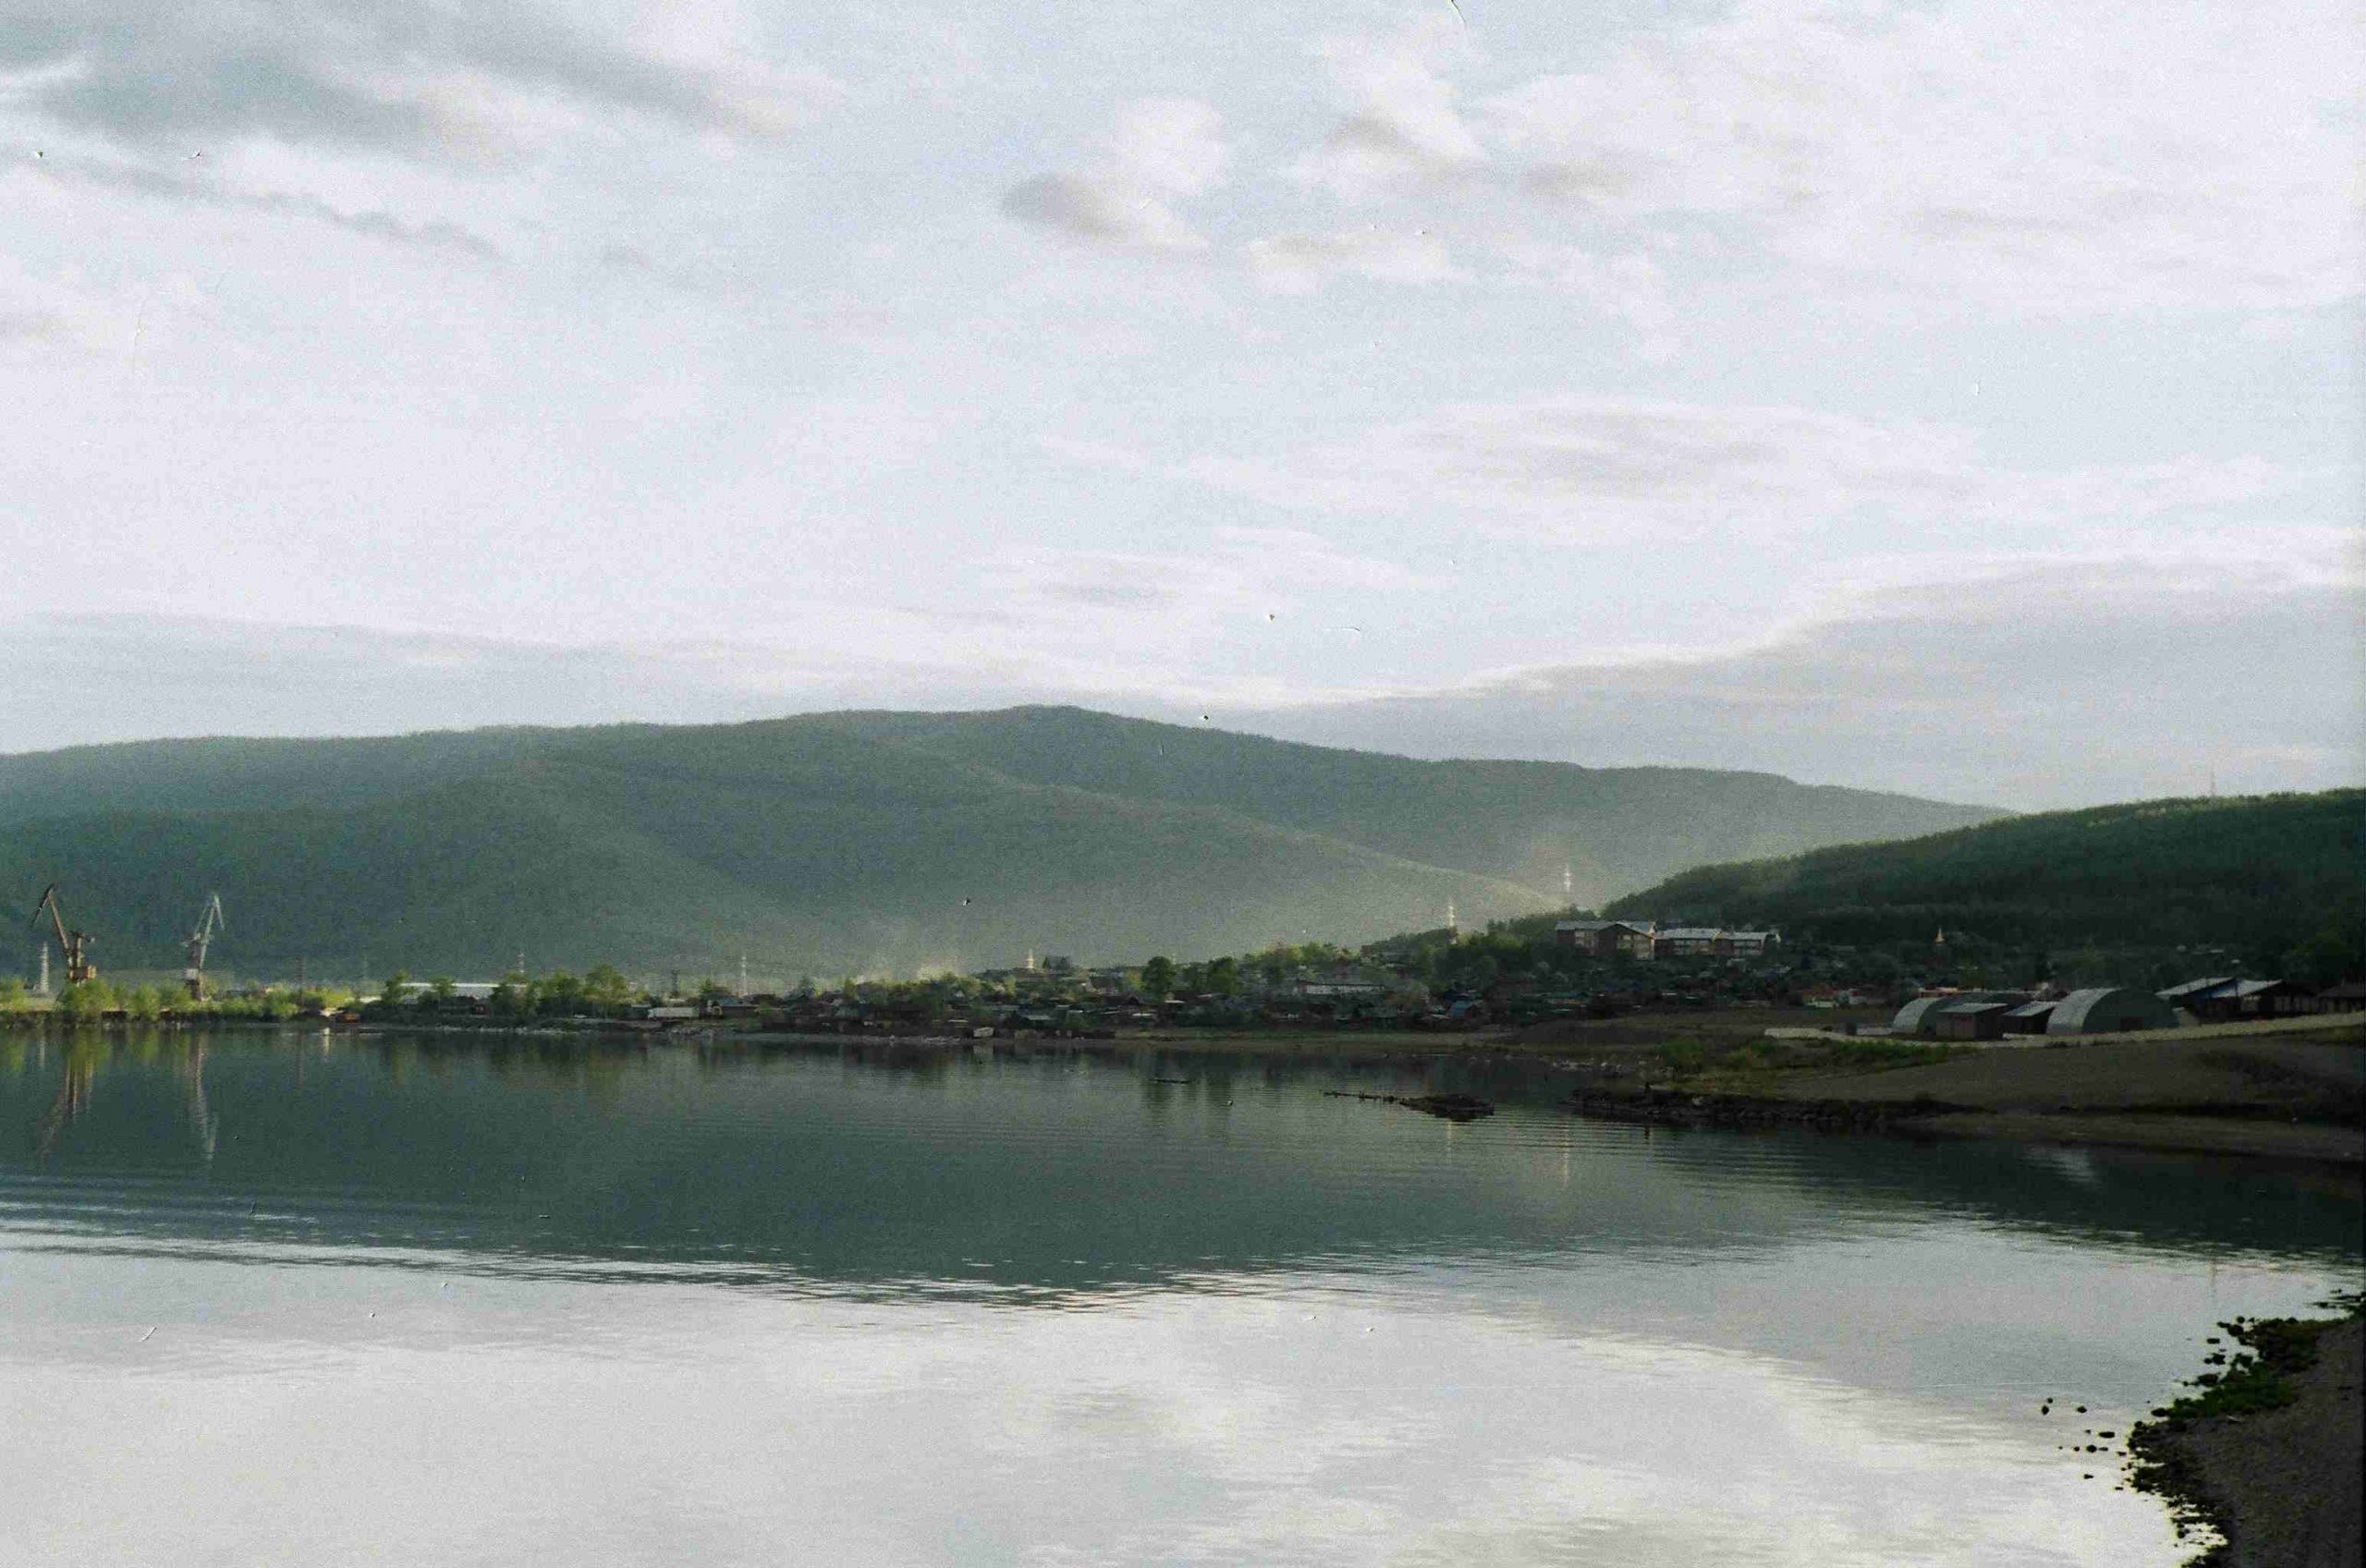 A landscape of the lake shore and the hills behind the lake shore. The water is still and reflects the hills. The sky is cloudy with some patches of blue.